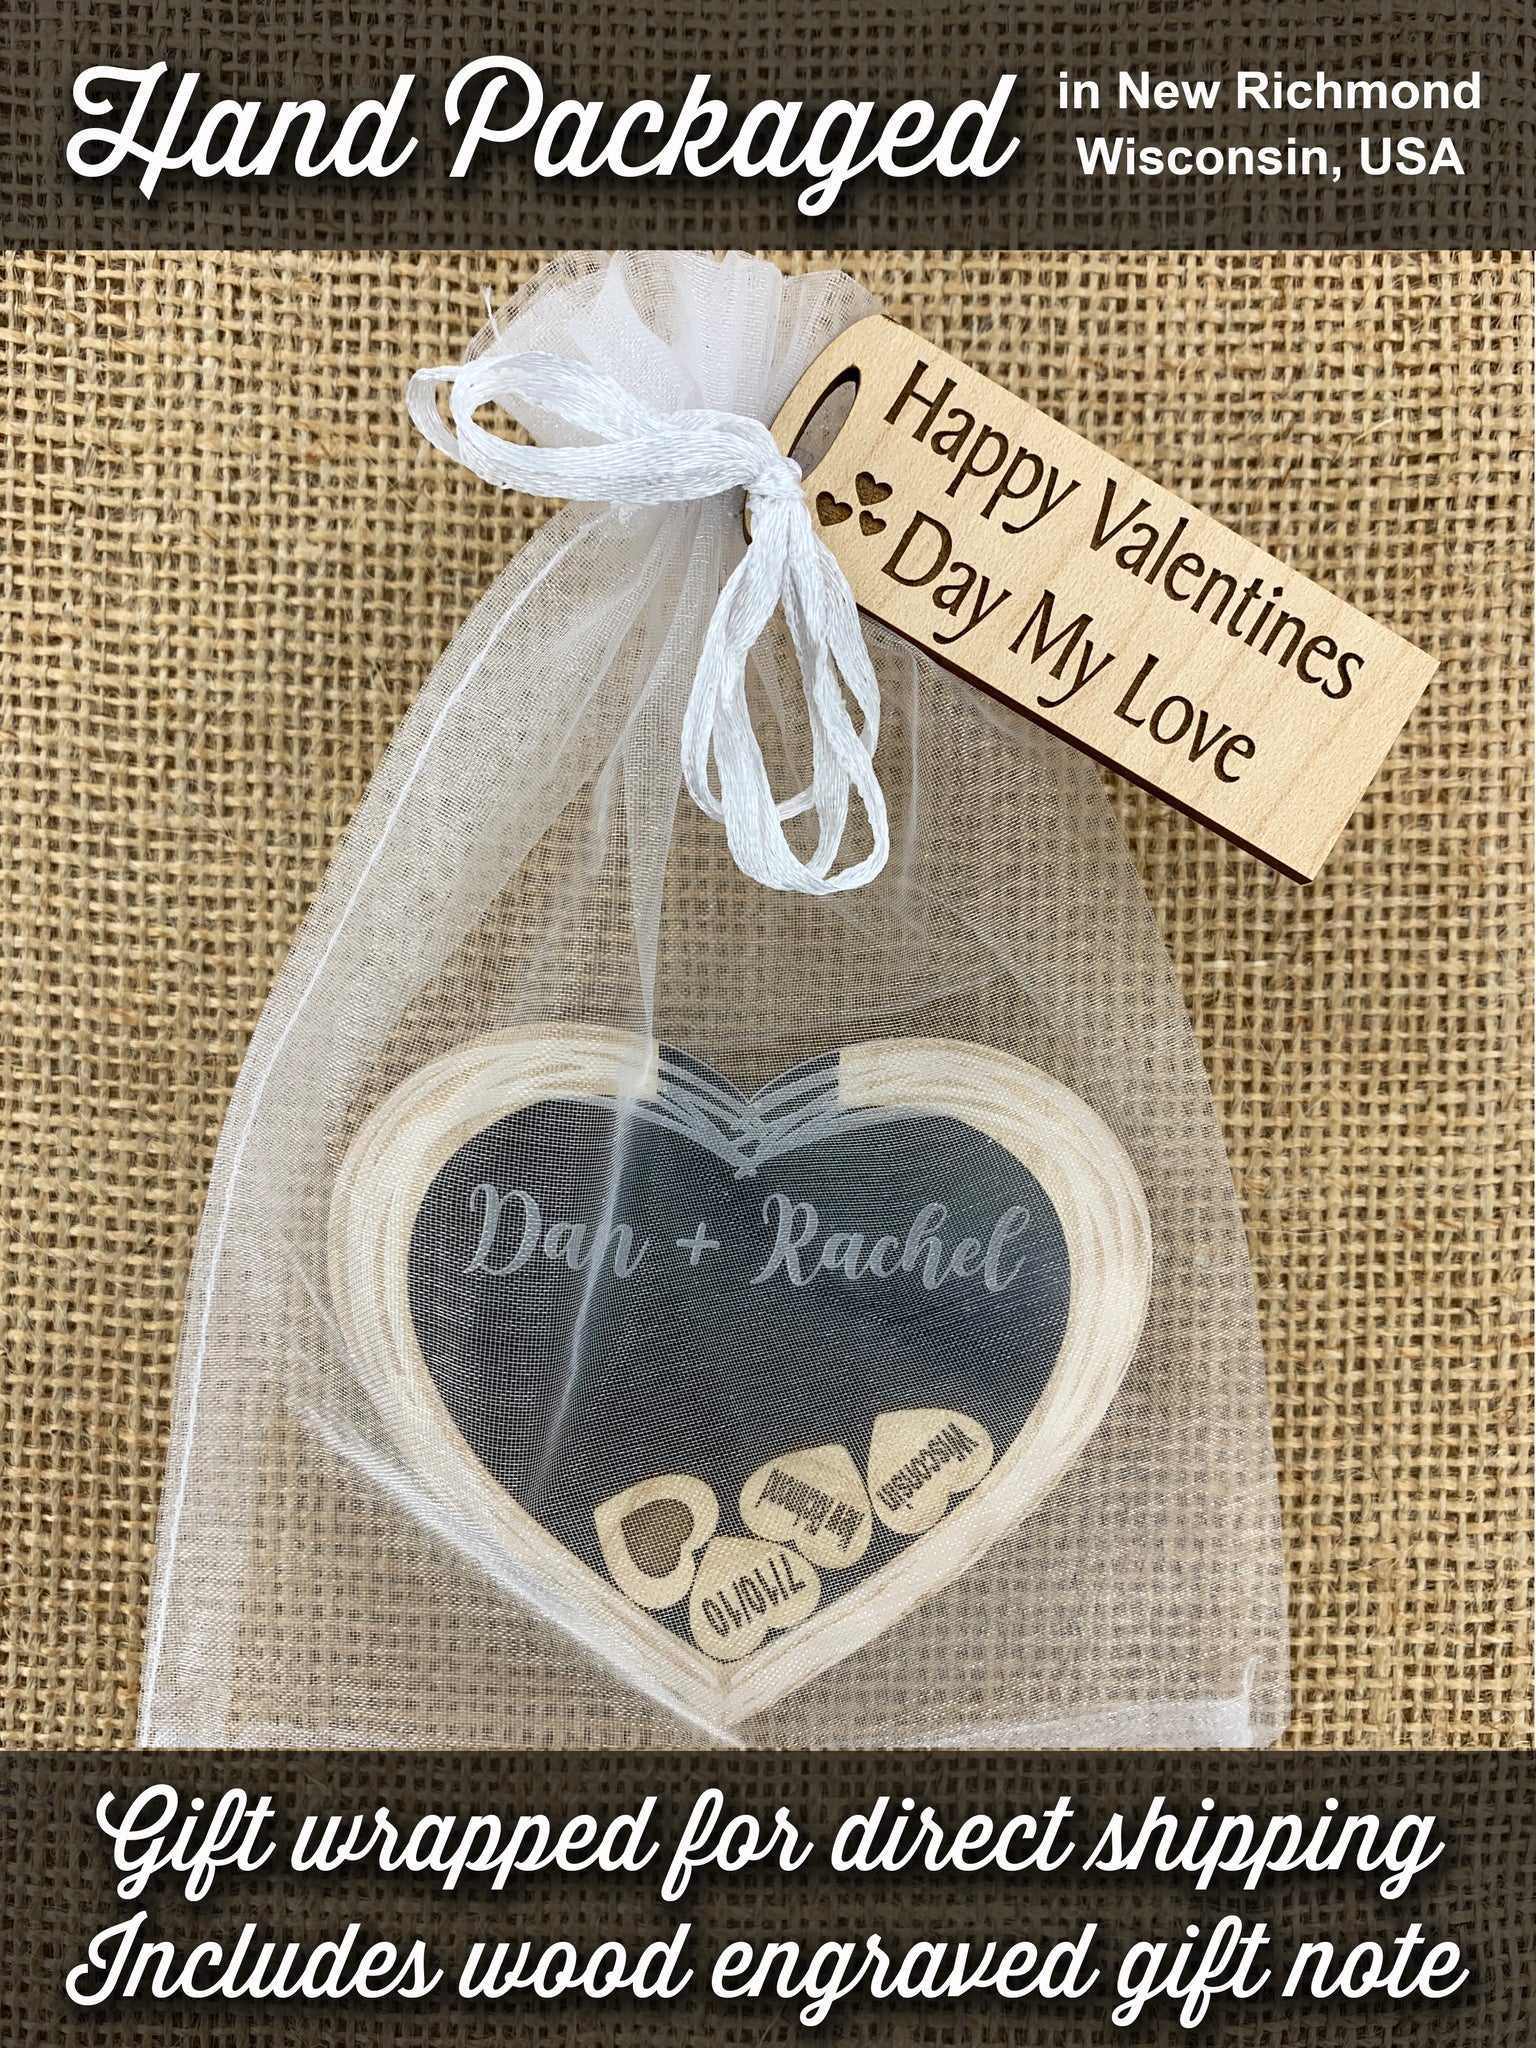 Personalized Valentine's Day Candy Gift Box – Boston Gift Baskets